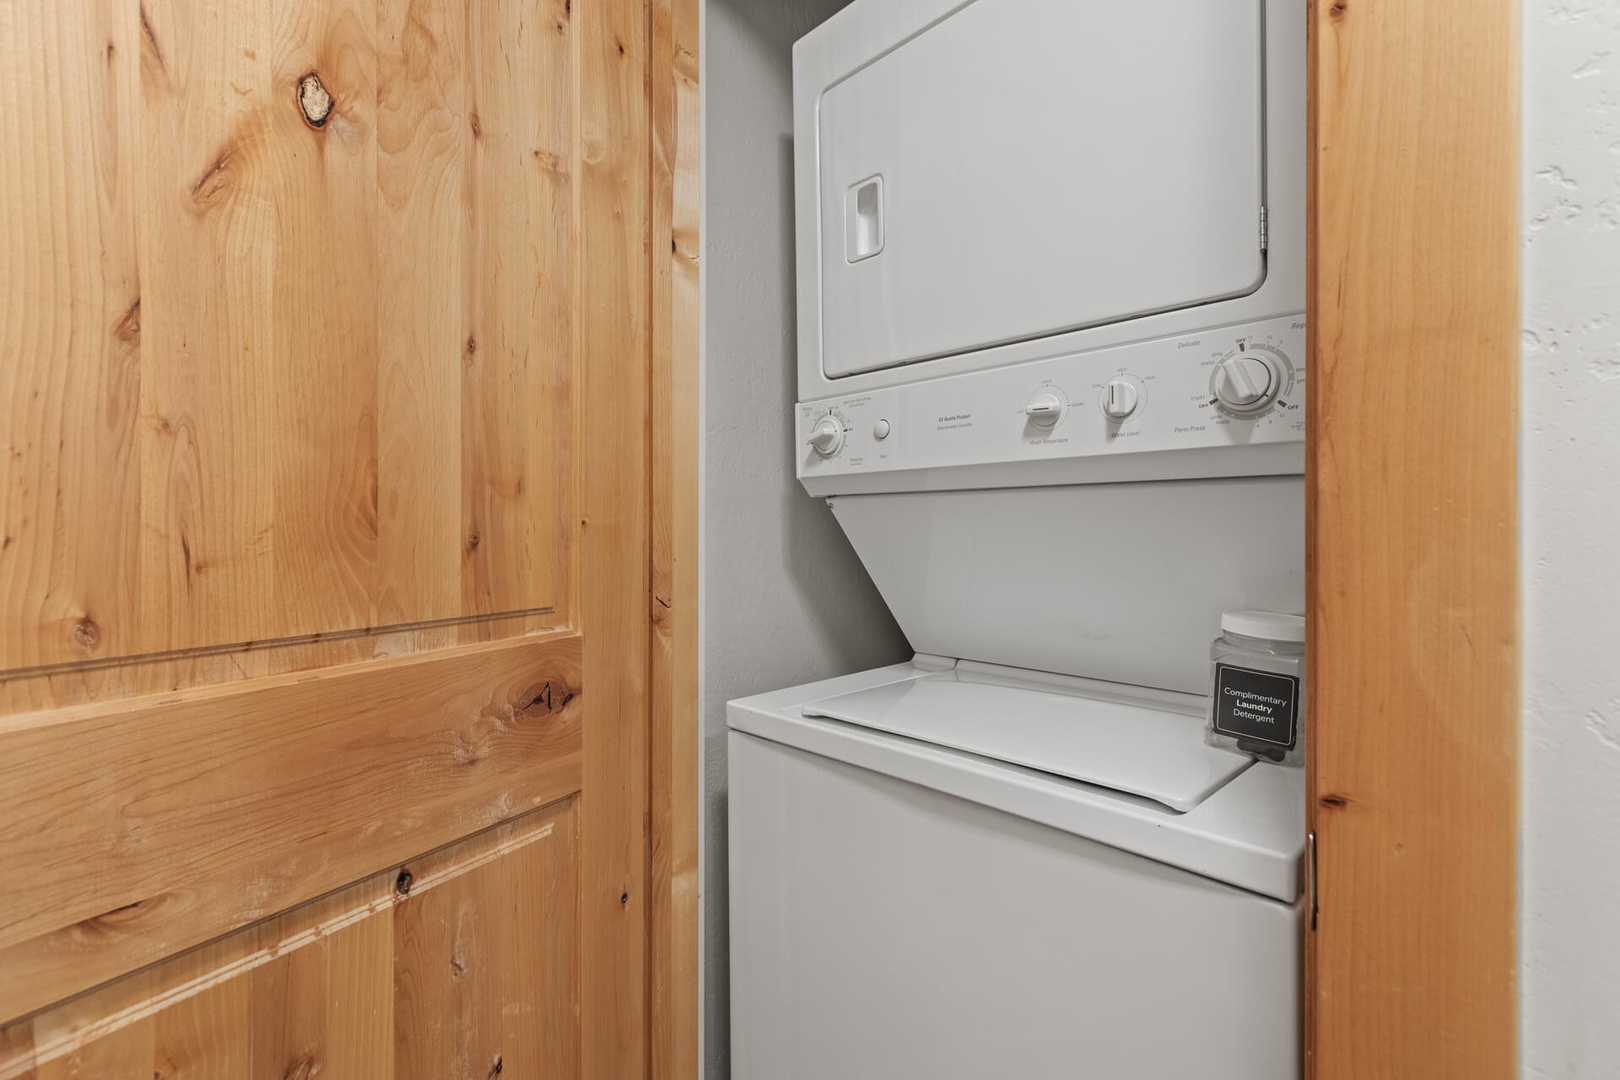 Bear Hollow Lodges 4201: Full sized washer and dryer in the unit gives easy access and cleanup after a day on the mountain.